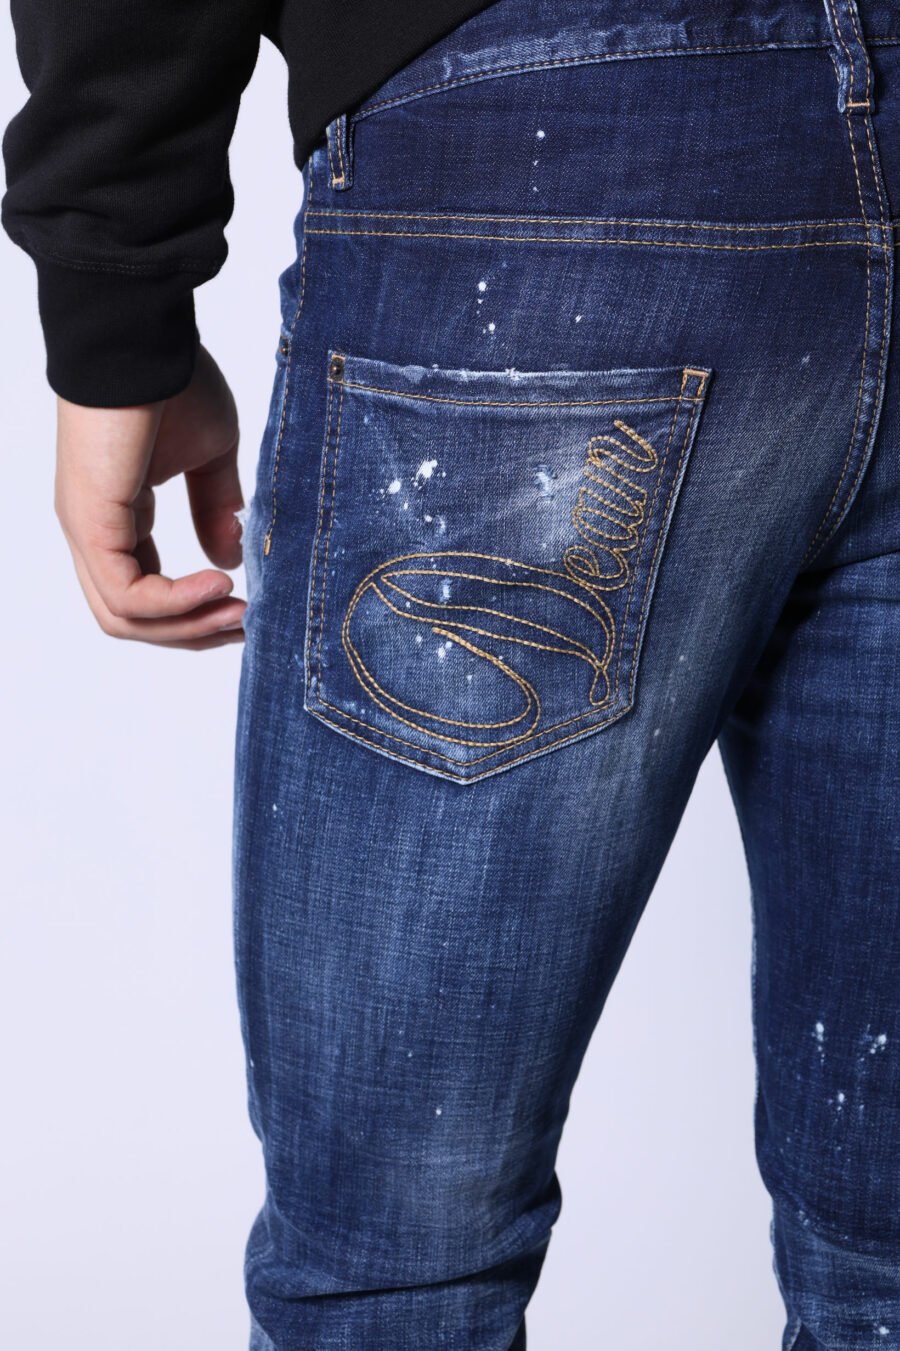 Blue "cool guy jean" jeans with paint and frayed - Untitled Catalog 05413